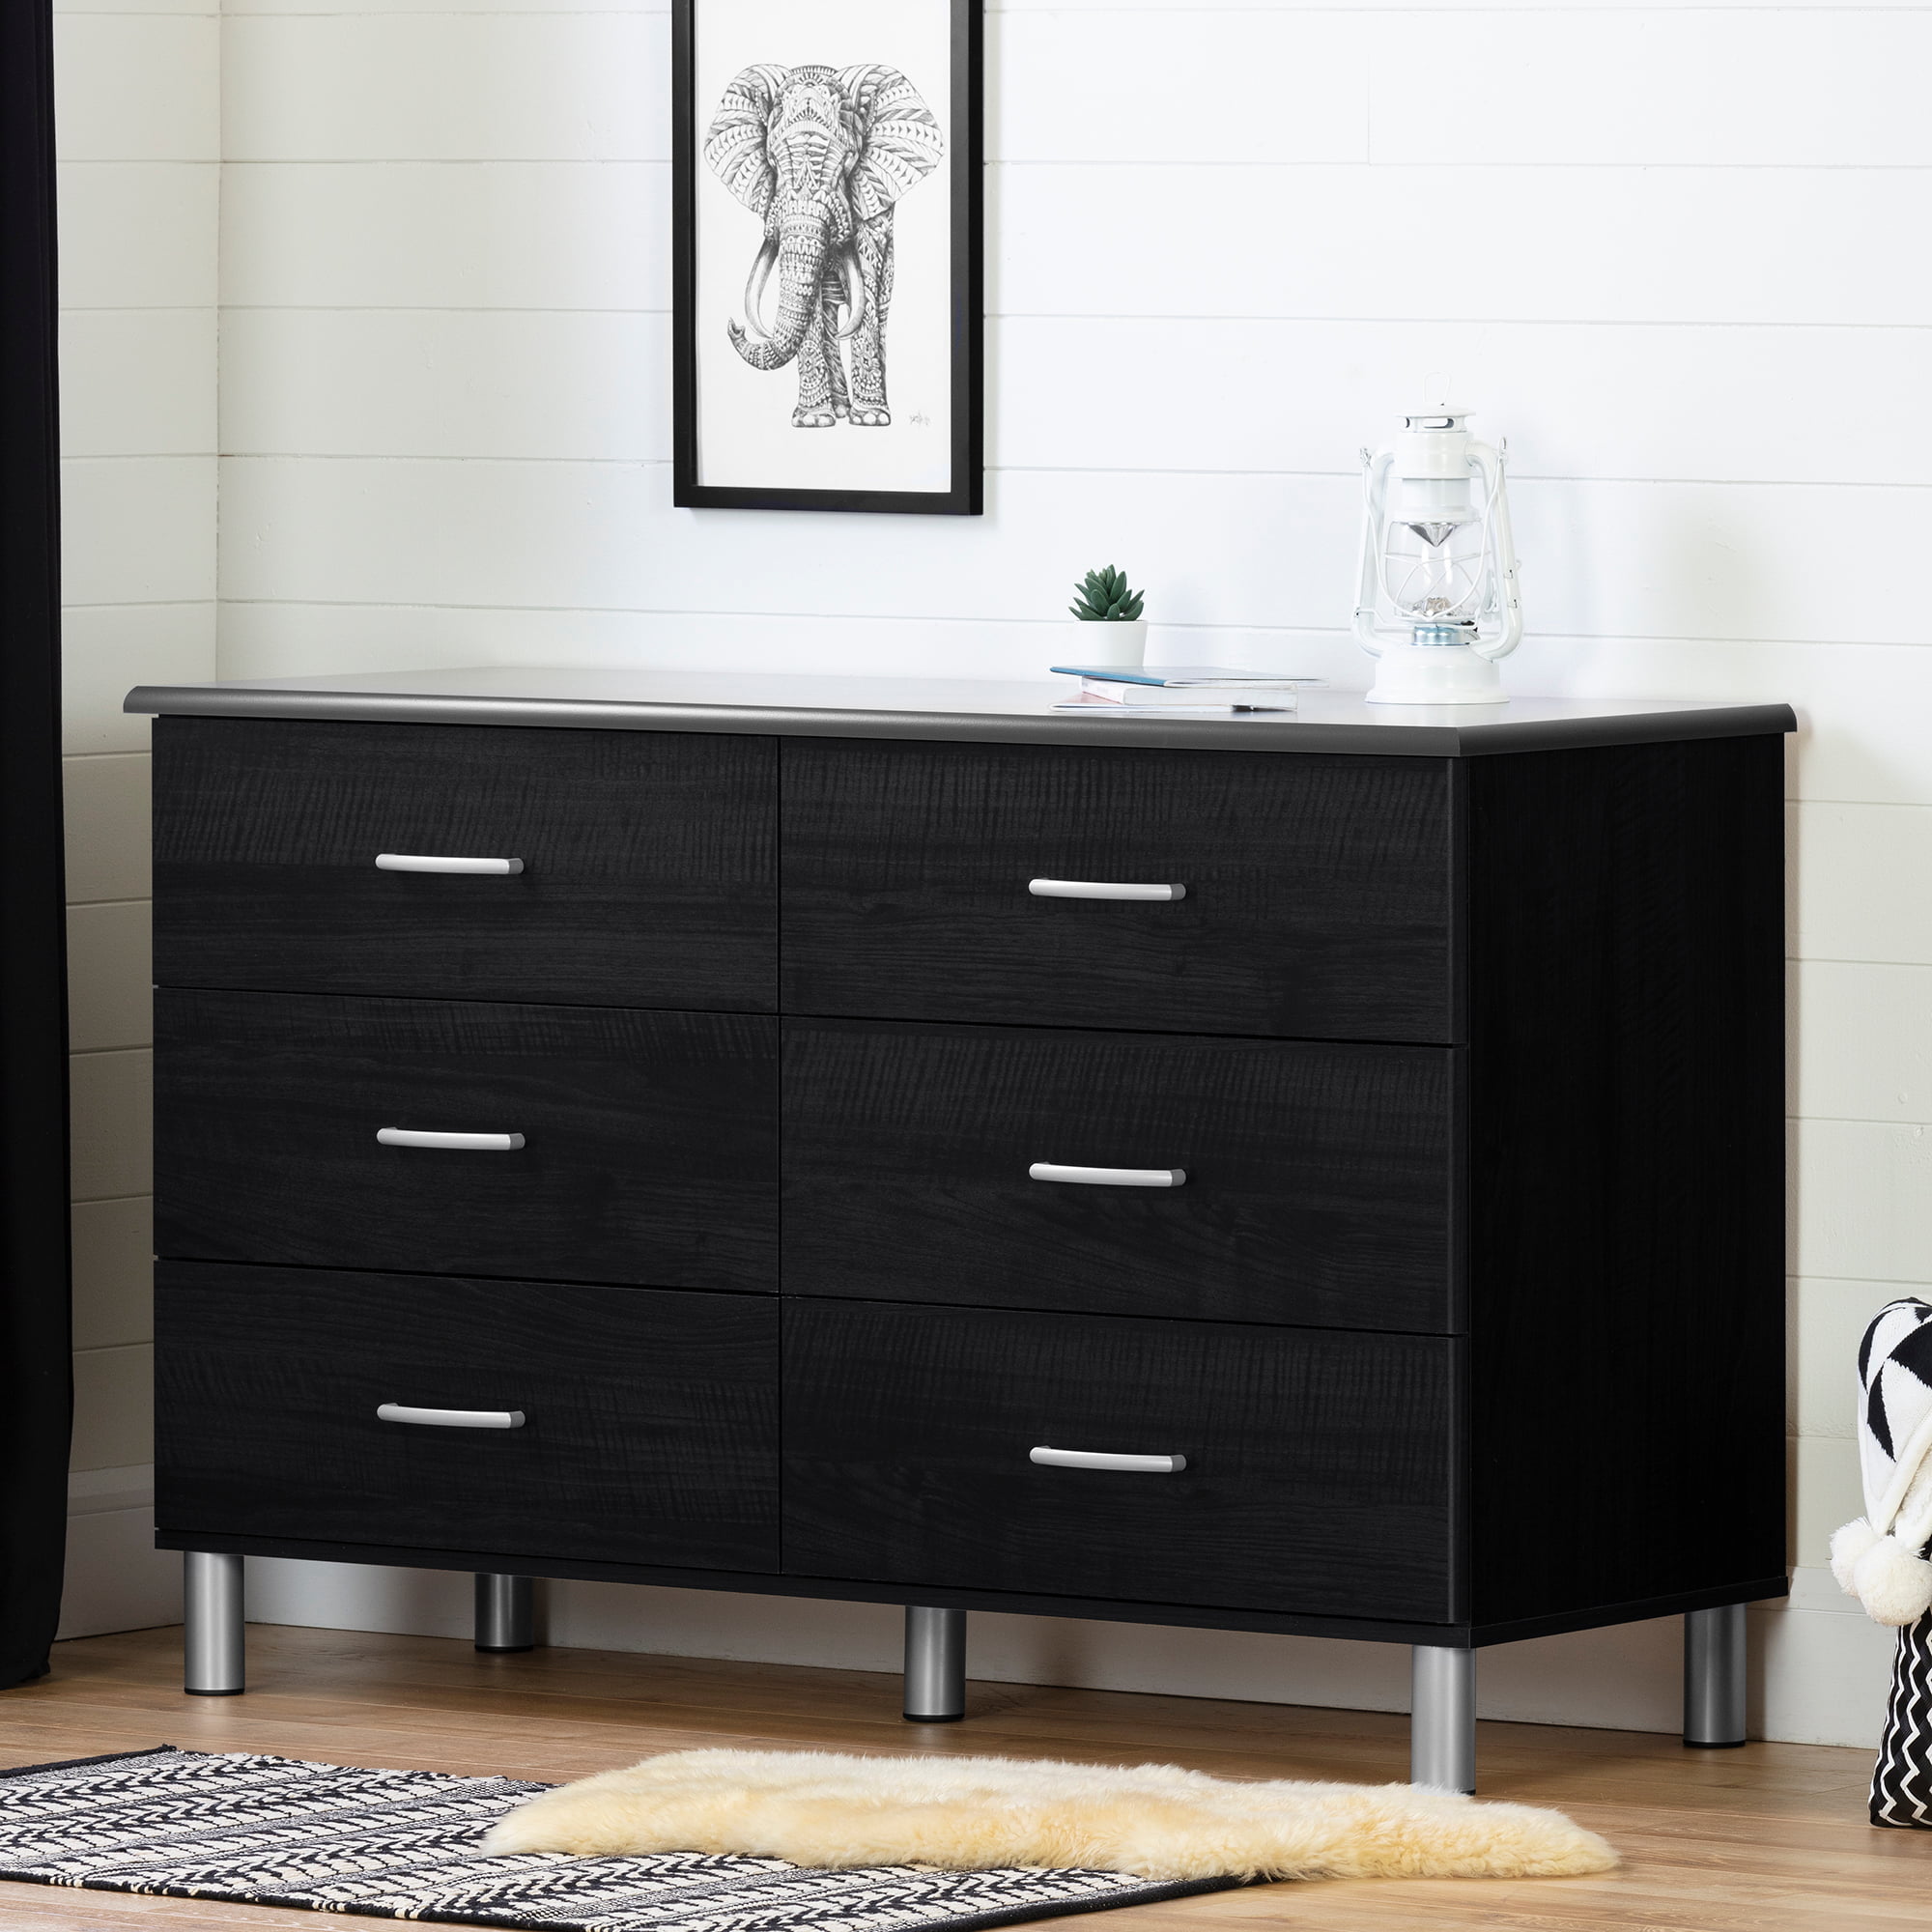 South Shore Cosmos Double 6 Drawer Dresser Charcoal And Black